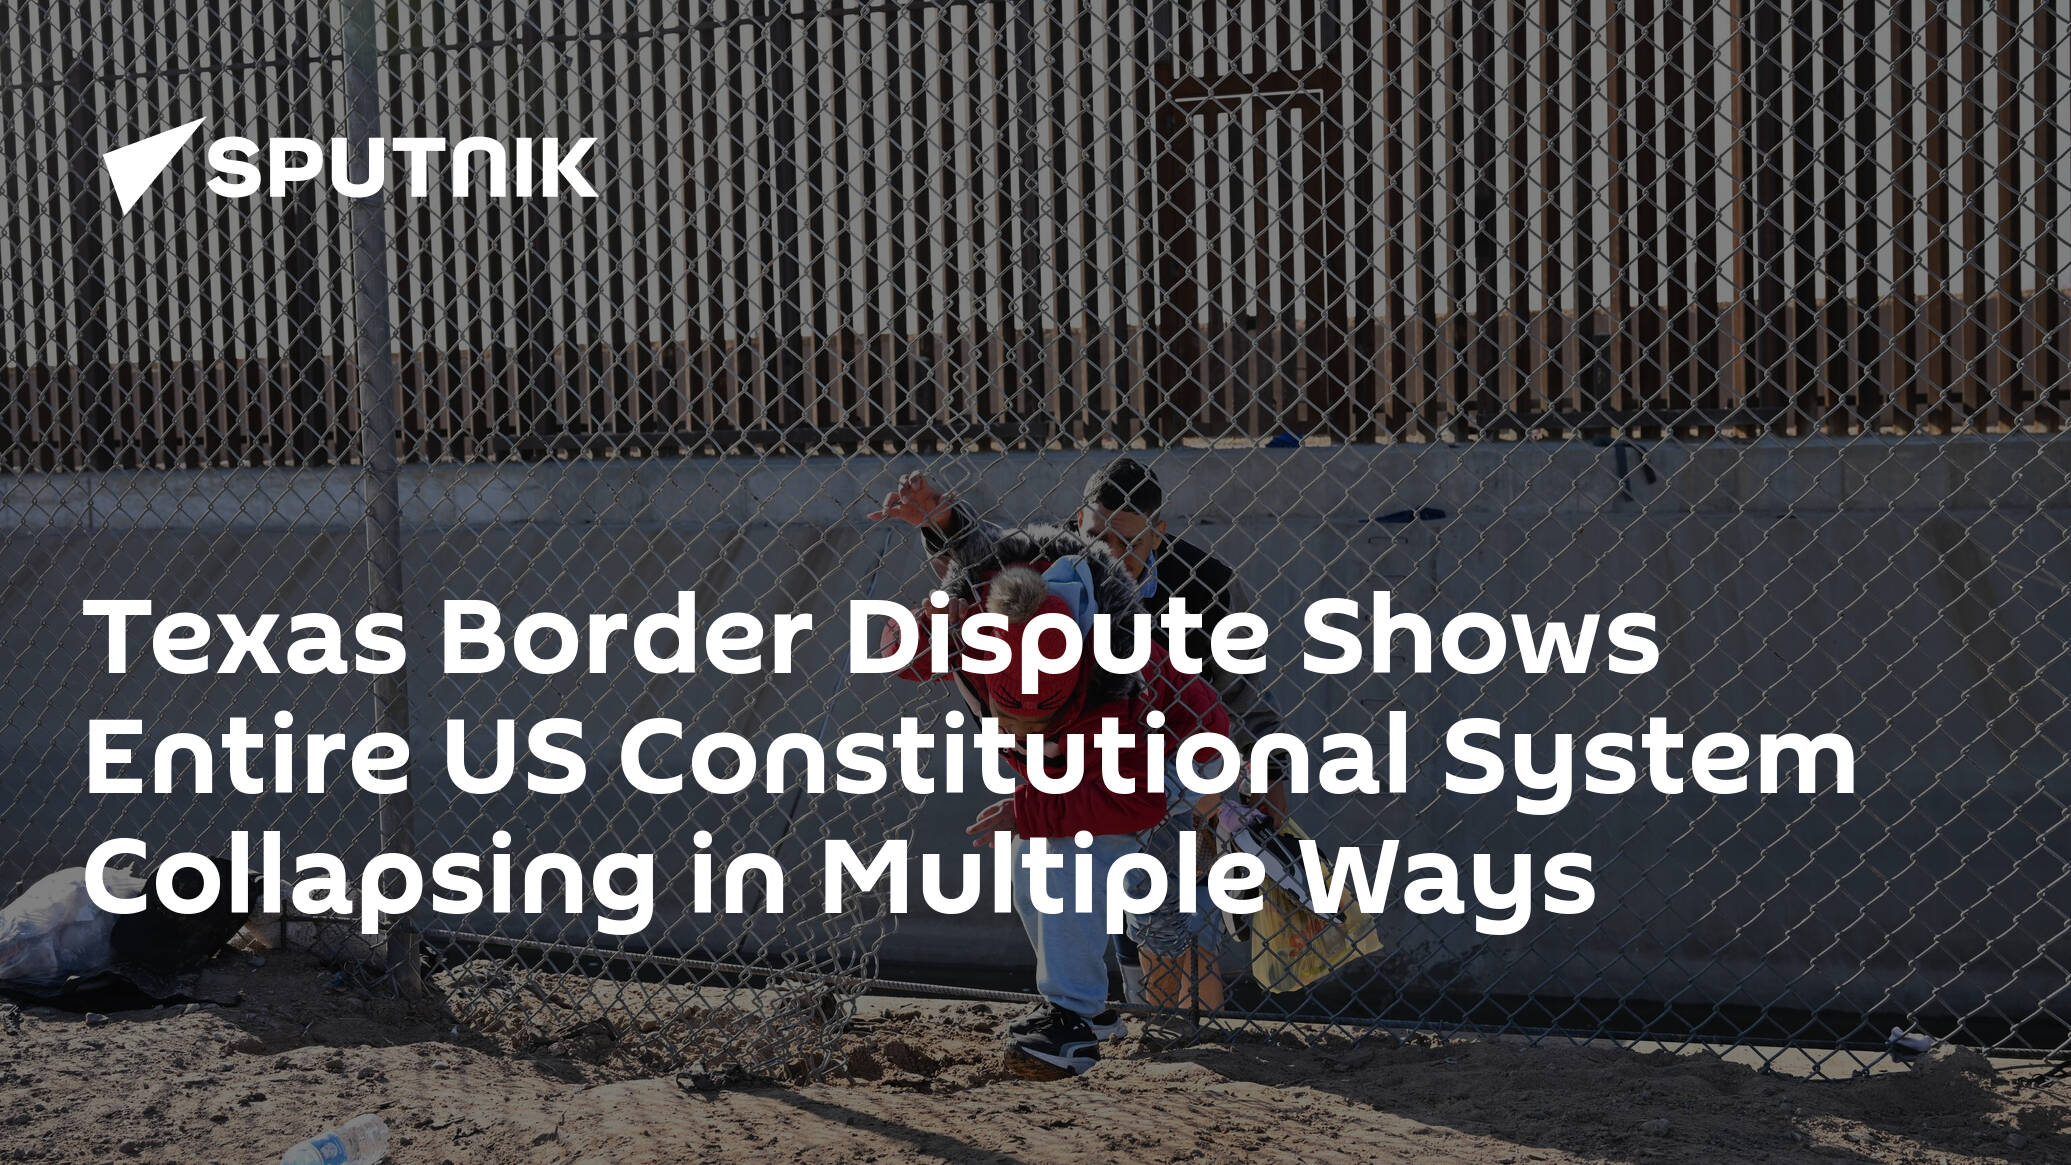 Texas Border Dispute Shows Entire US Constitutional System Collapsing in Multiple Ways